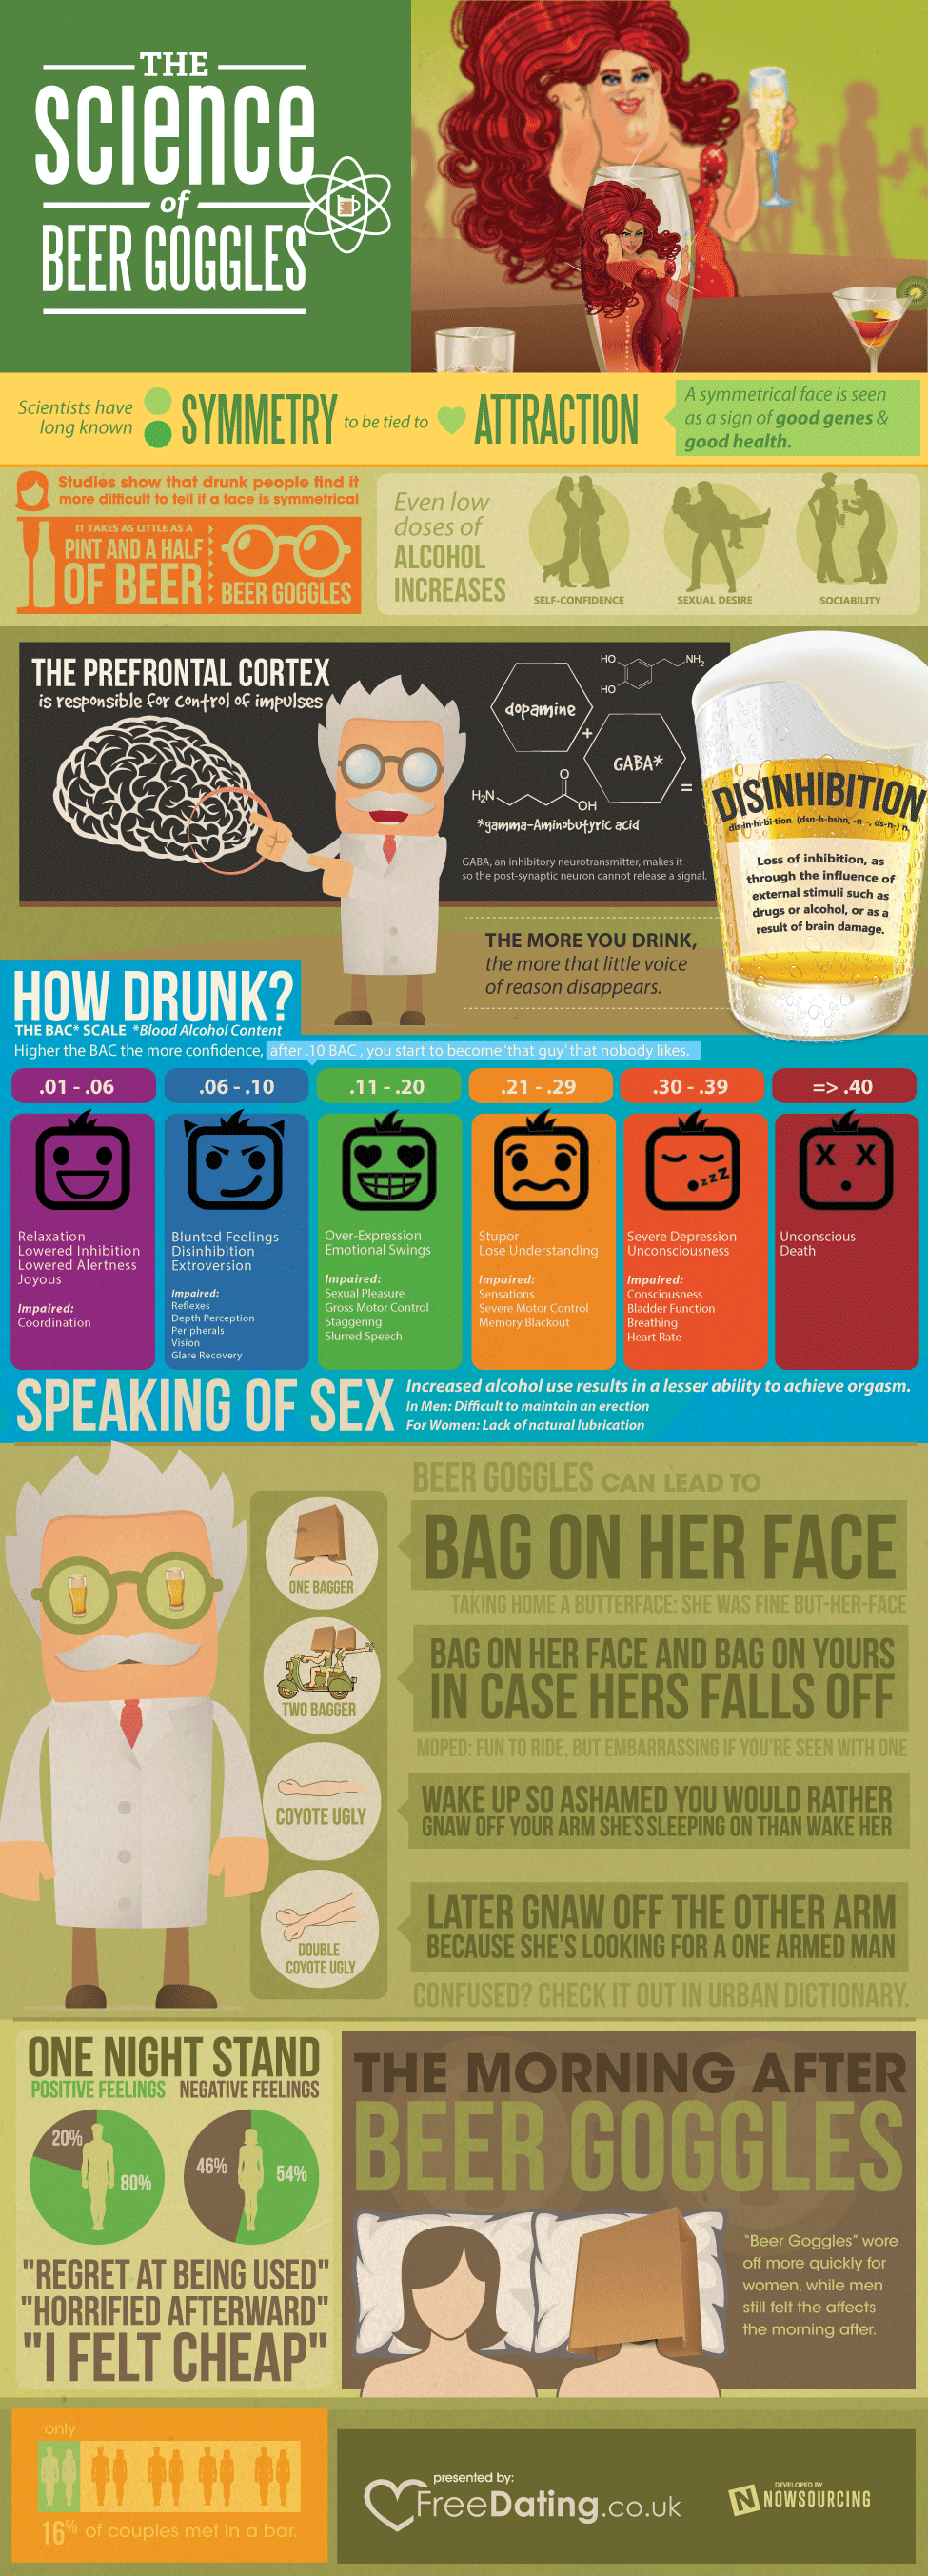 The Science of Beer Goggles